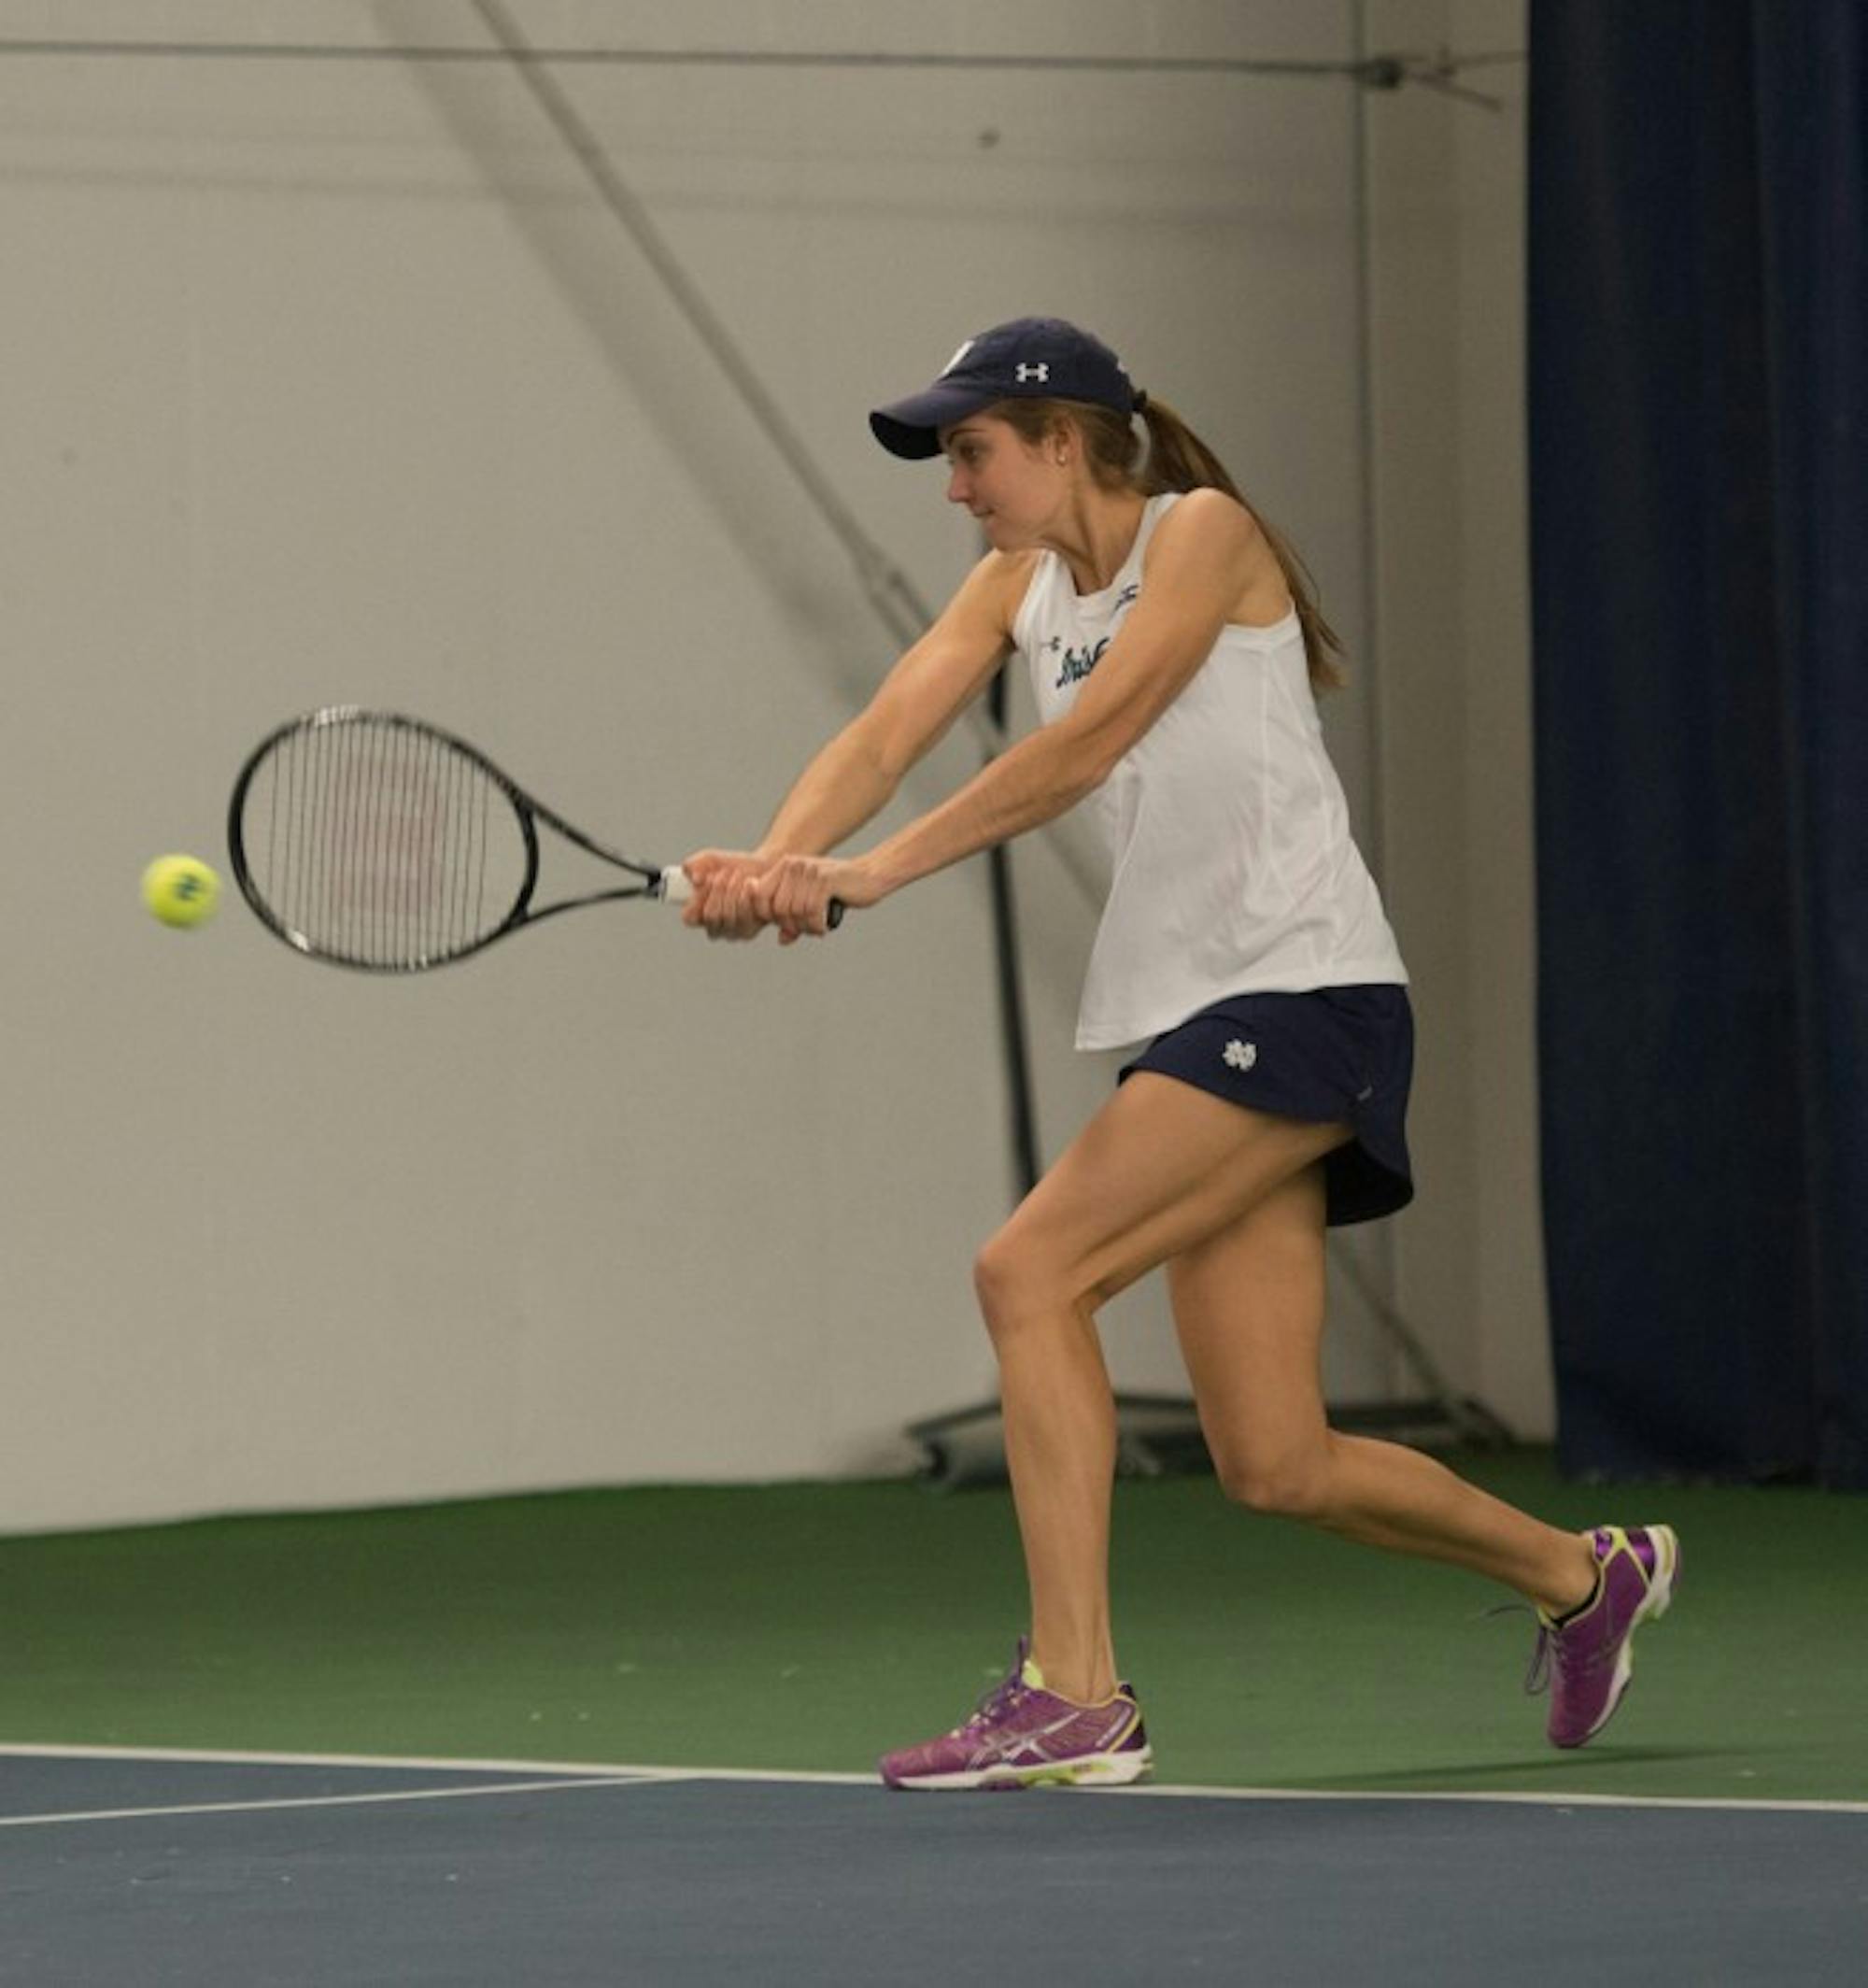 Sophomore Mary Closs returns a shot during Notre Dame’s 6-1 loss to No. 8 Stanford at Eck Tennis Pavilion on Feb. 6.